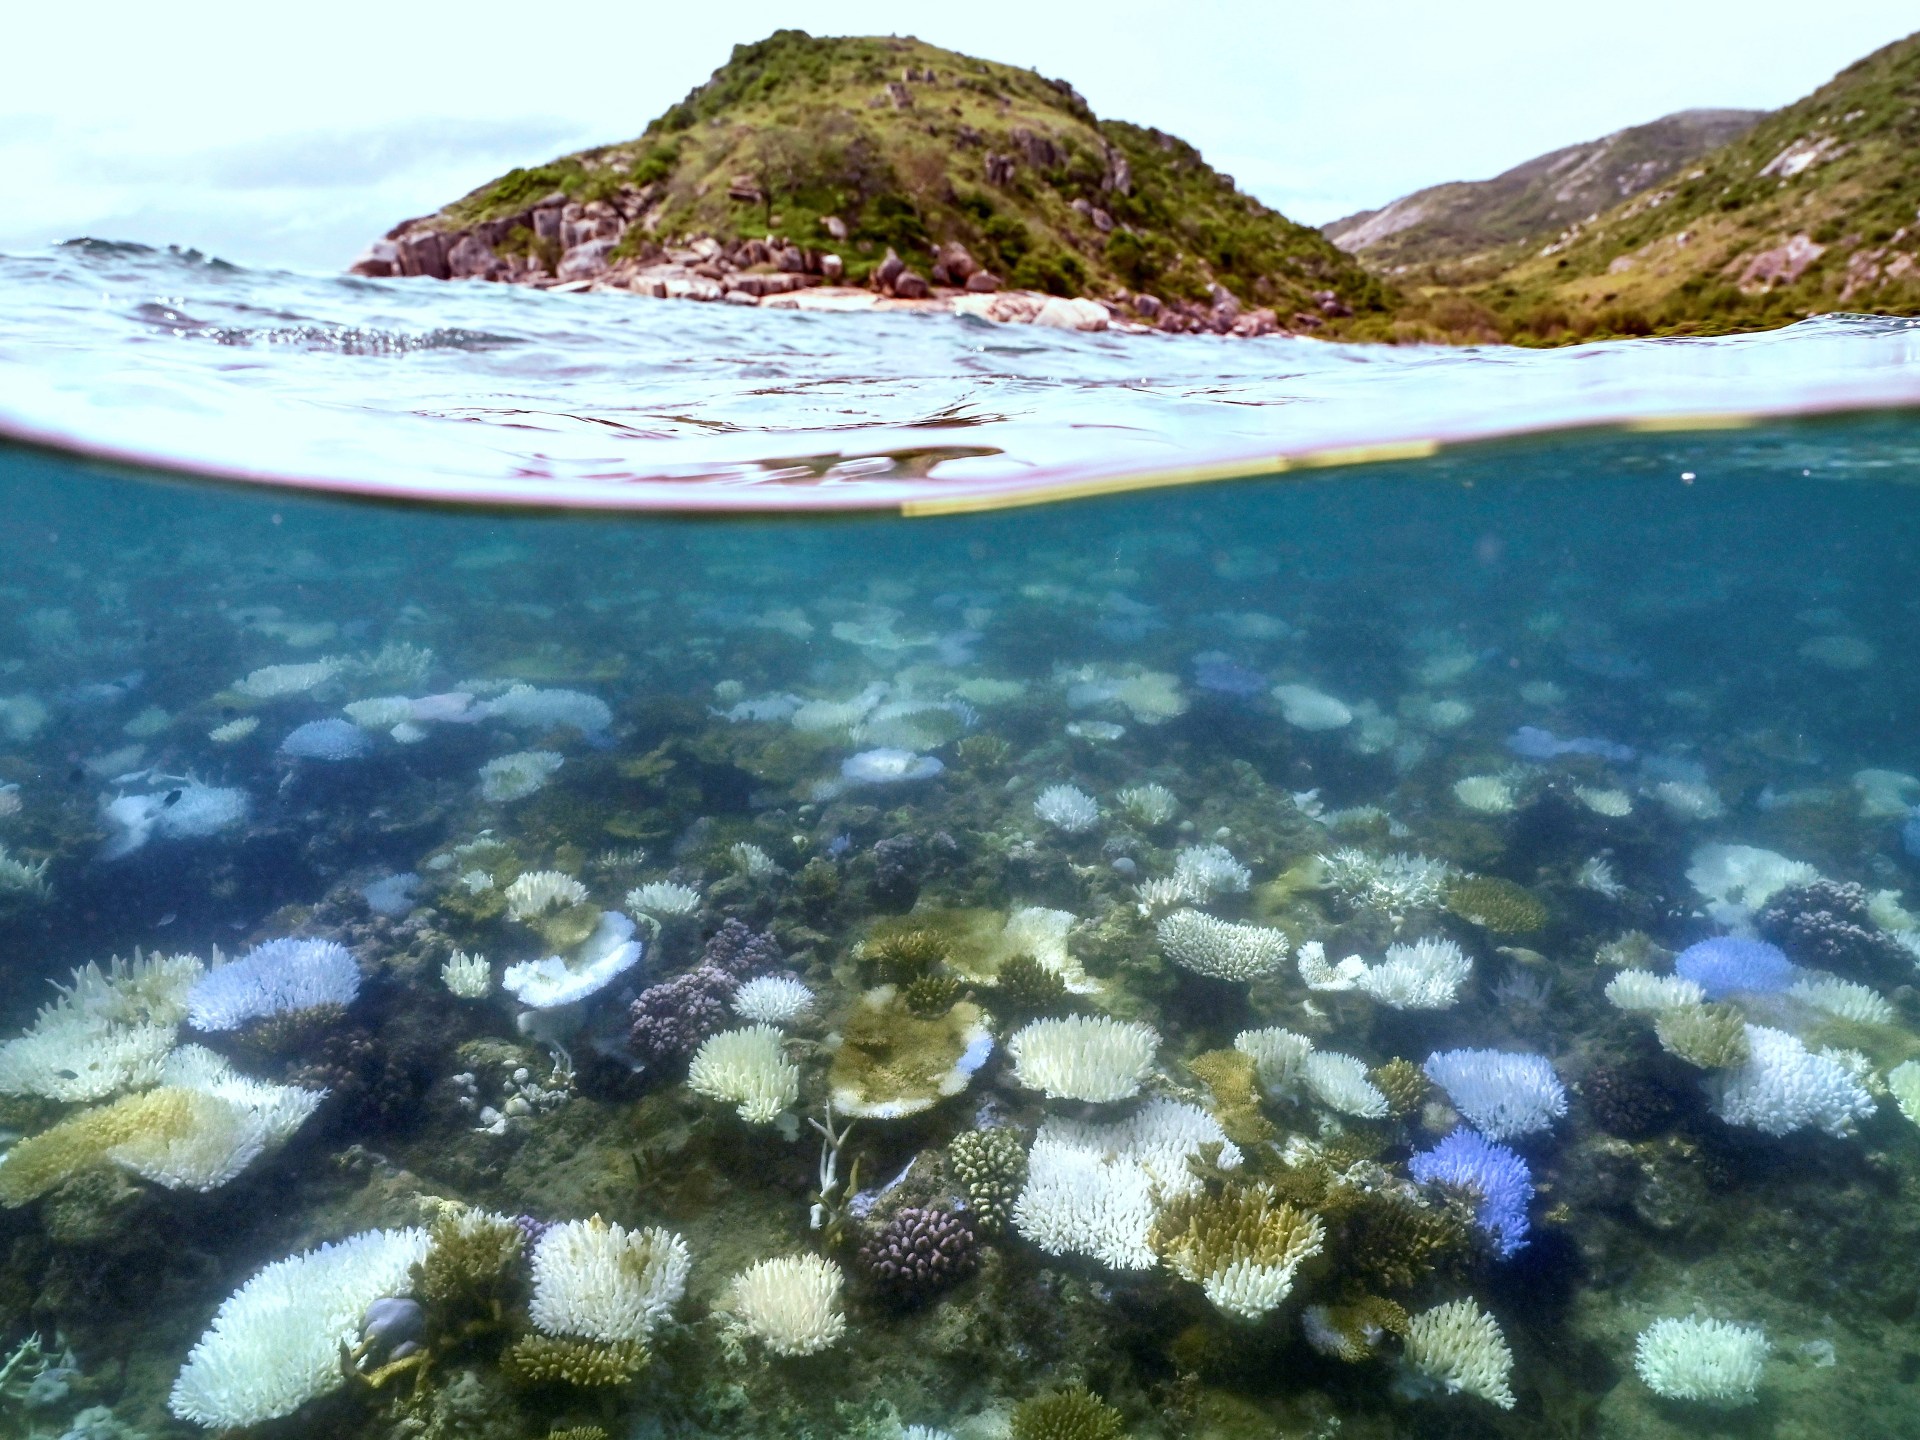 Australia’s Great Barrier Reef suffers worst bleaching on record | Environment News